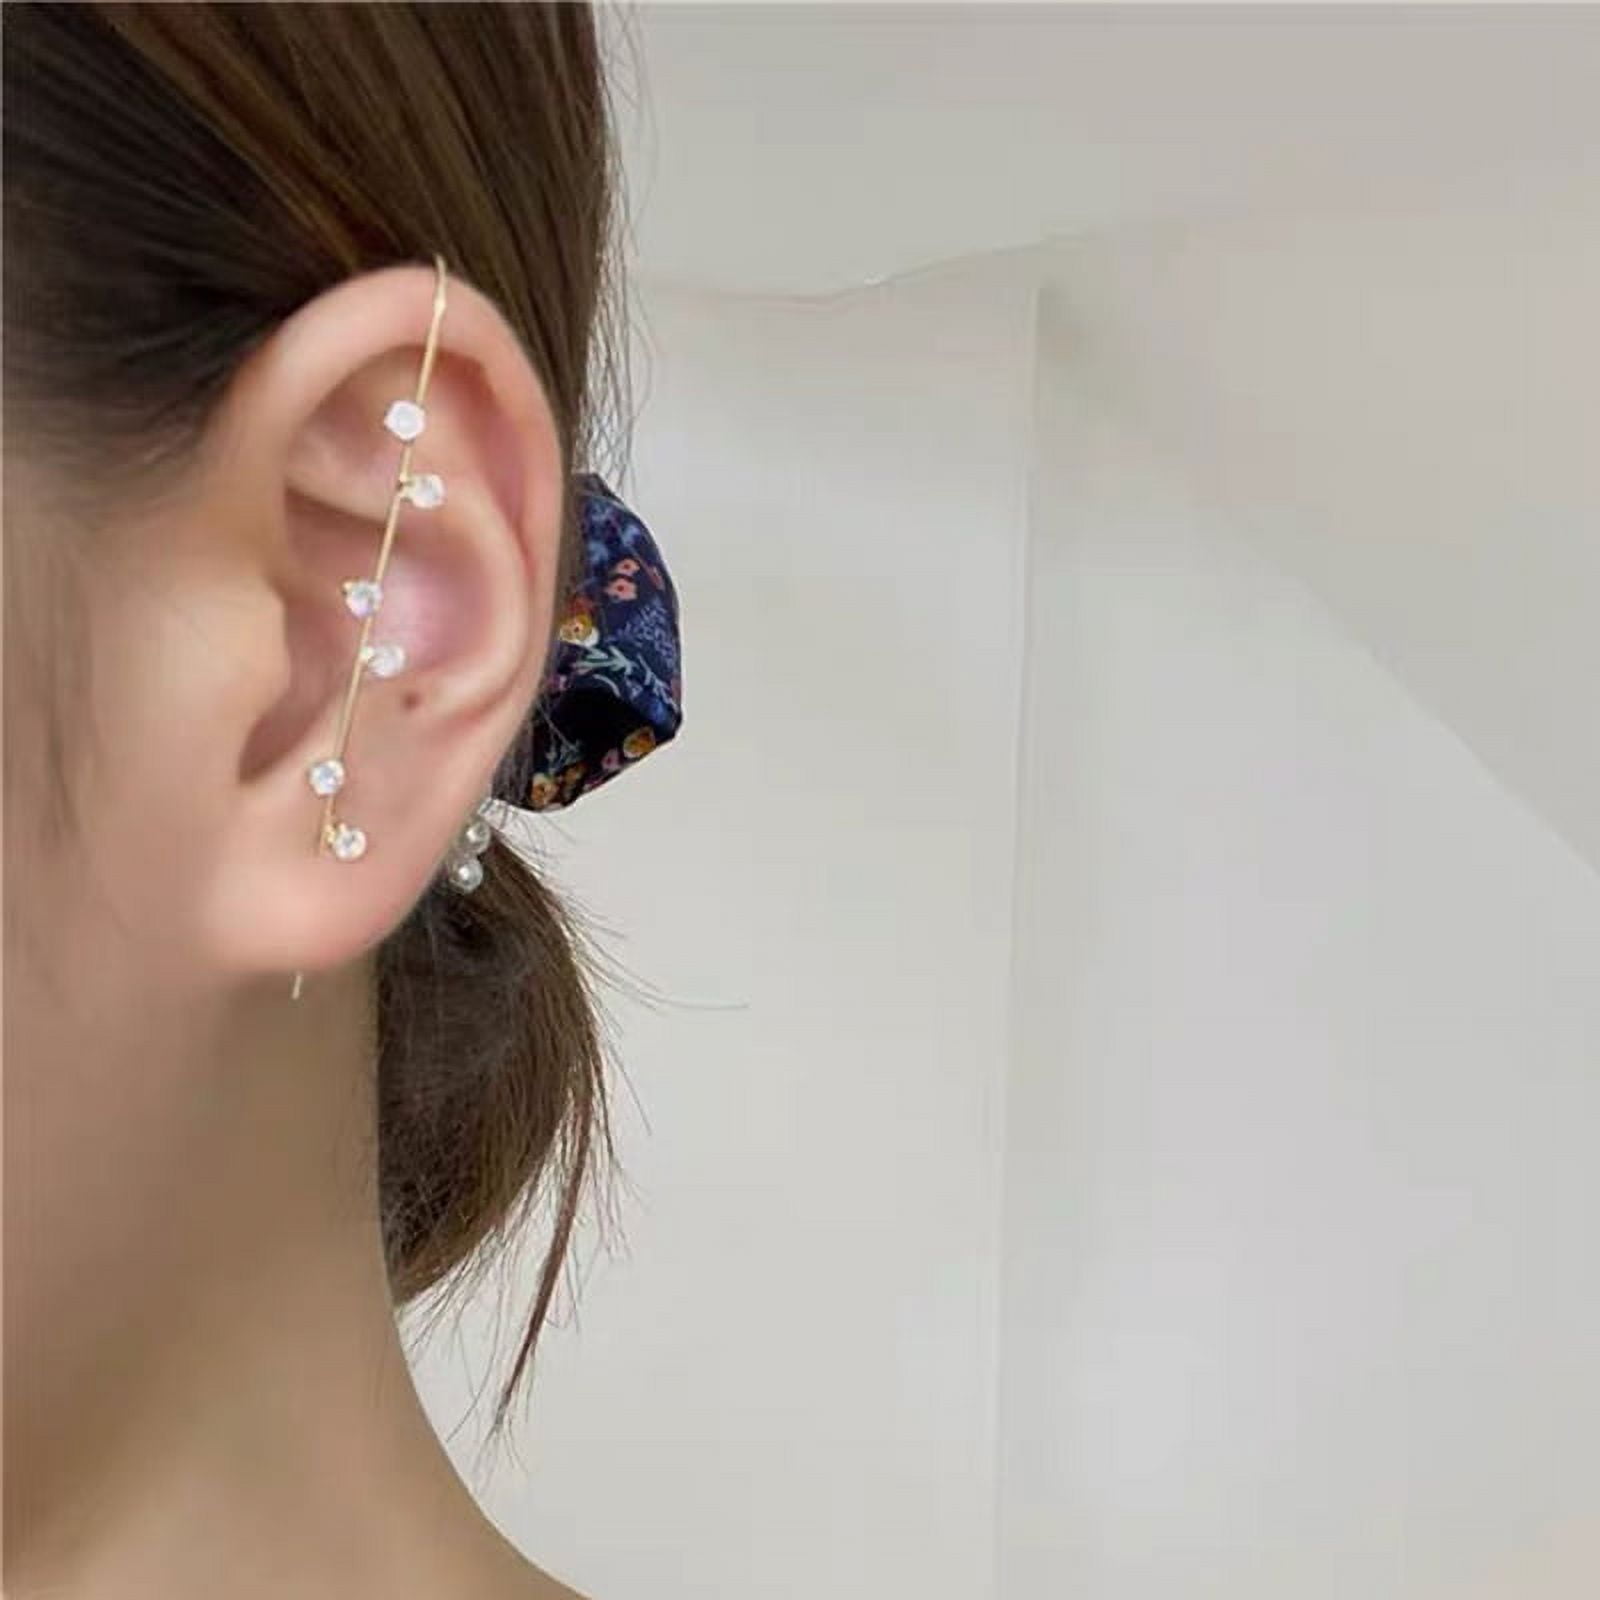 Earrings for Stretched Lobes: How to Rescue (Or Hide) Droopy Earlobes -  FASHION Magazine